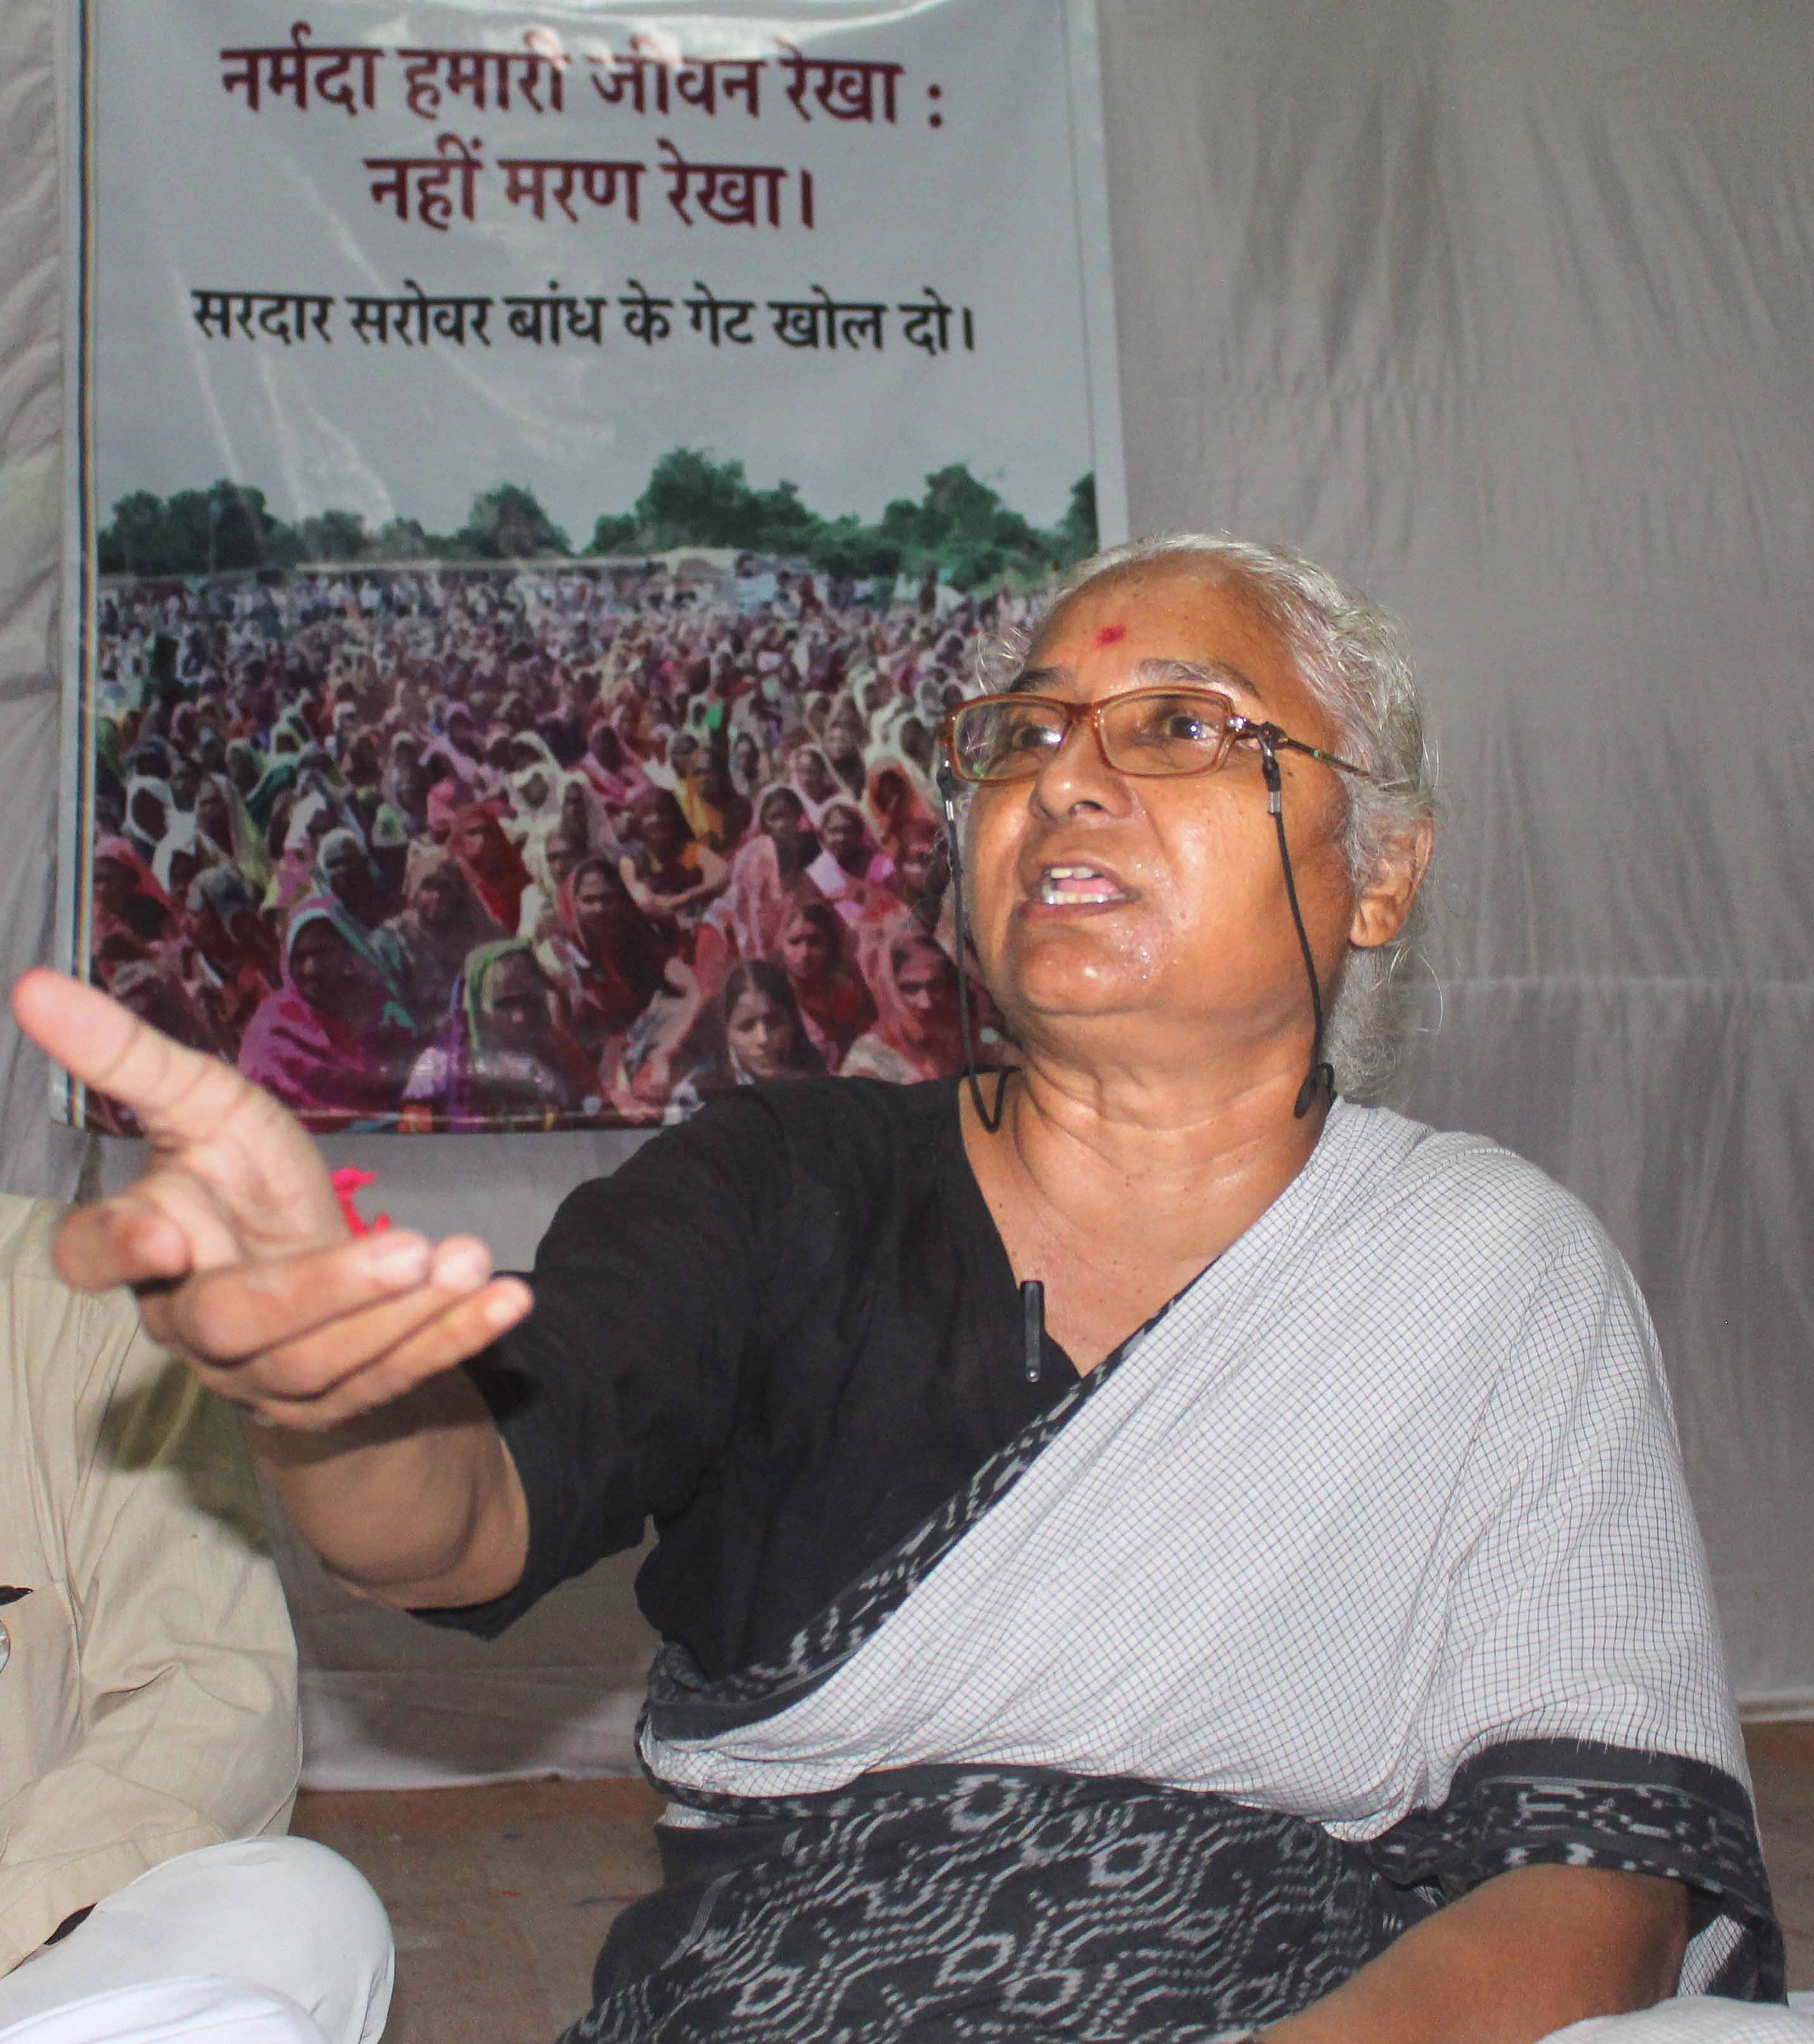 Patkar demanded that aid be provided for the labourers from the PM Cares Fund. (Credit: PTI Photo)